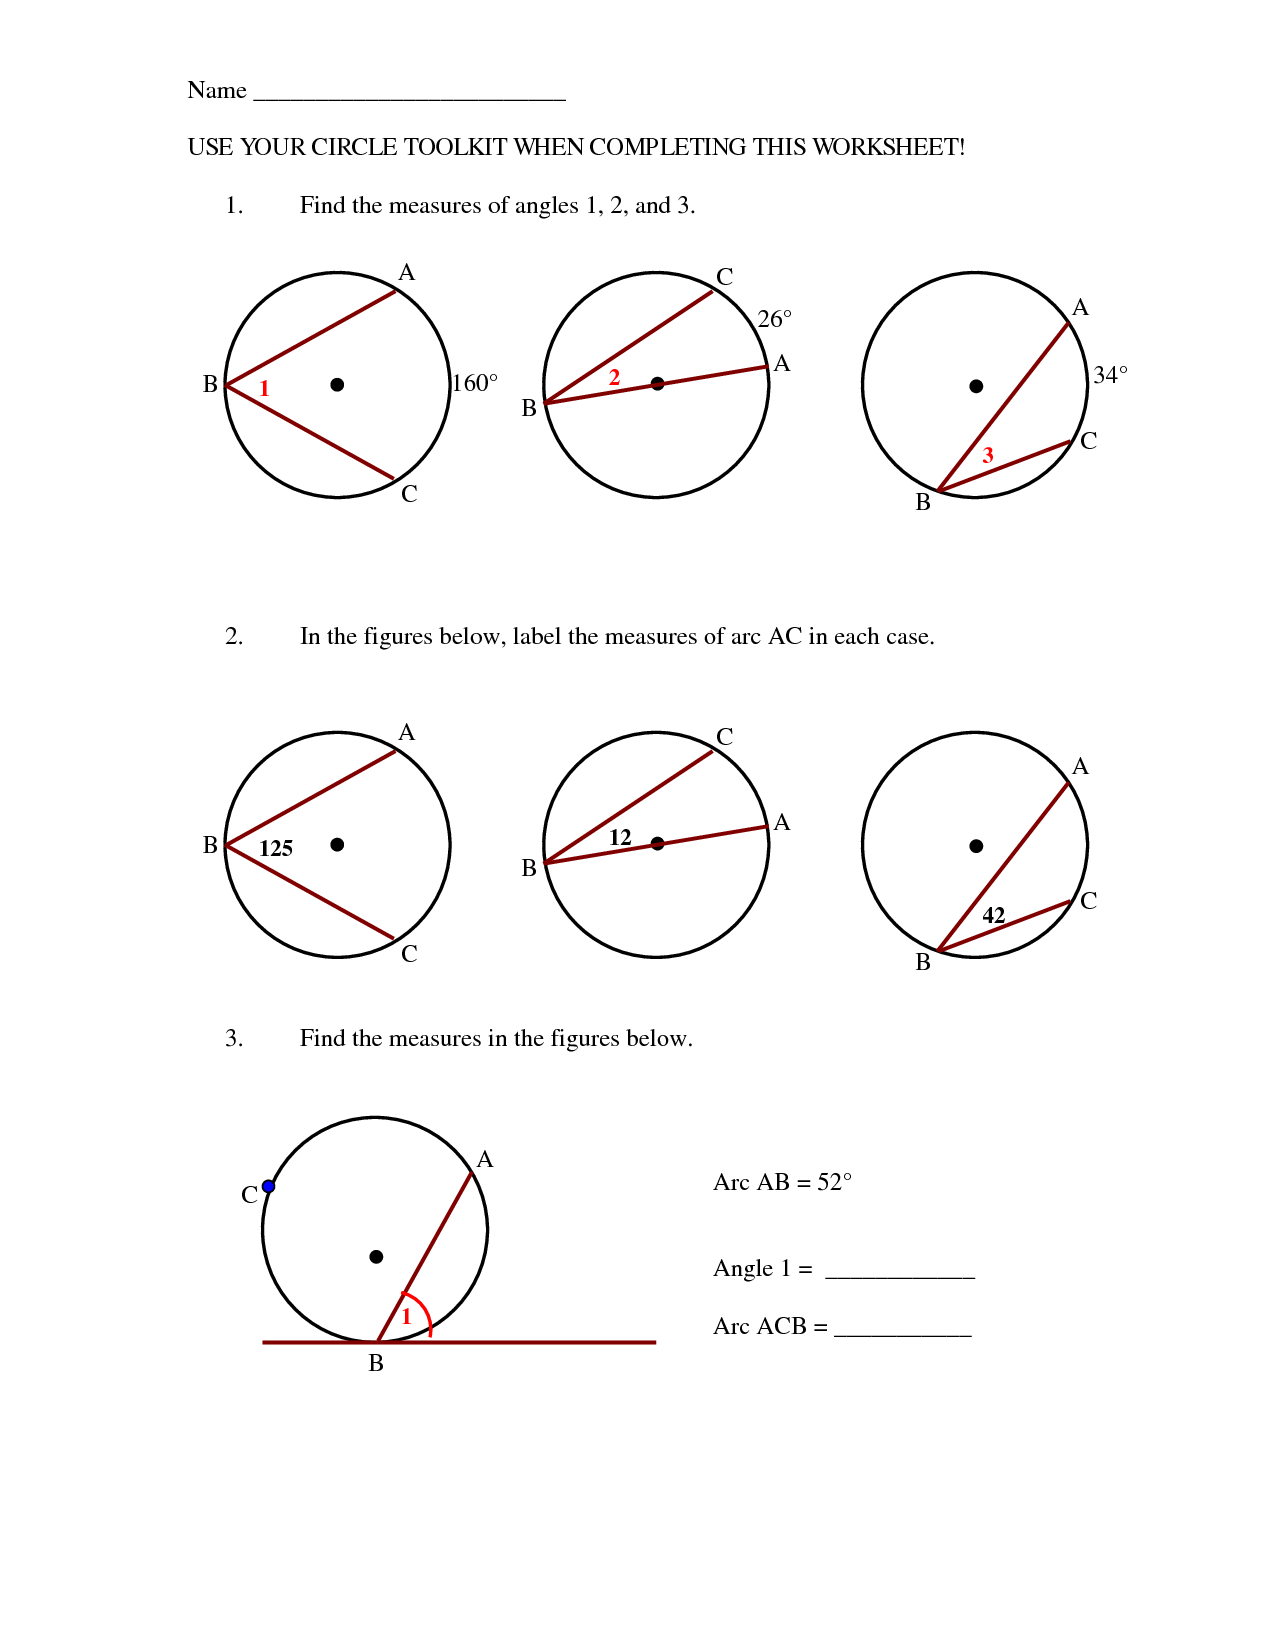 13 Best Images of Angle Practice Worksheet - 7th Grade Geometry